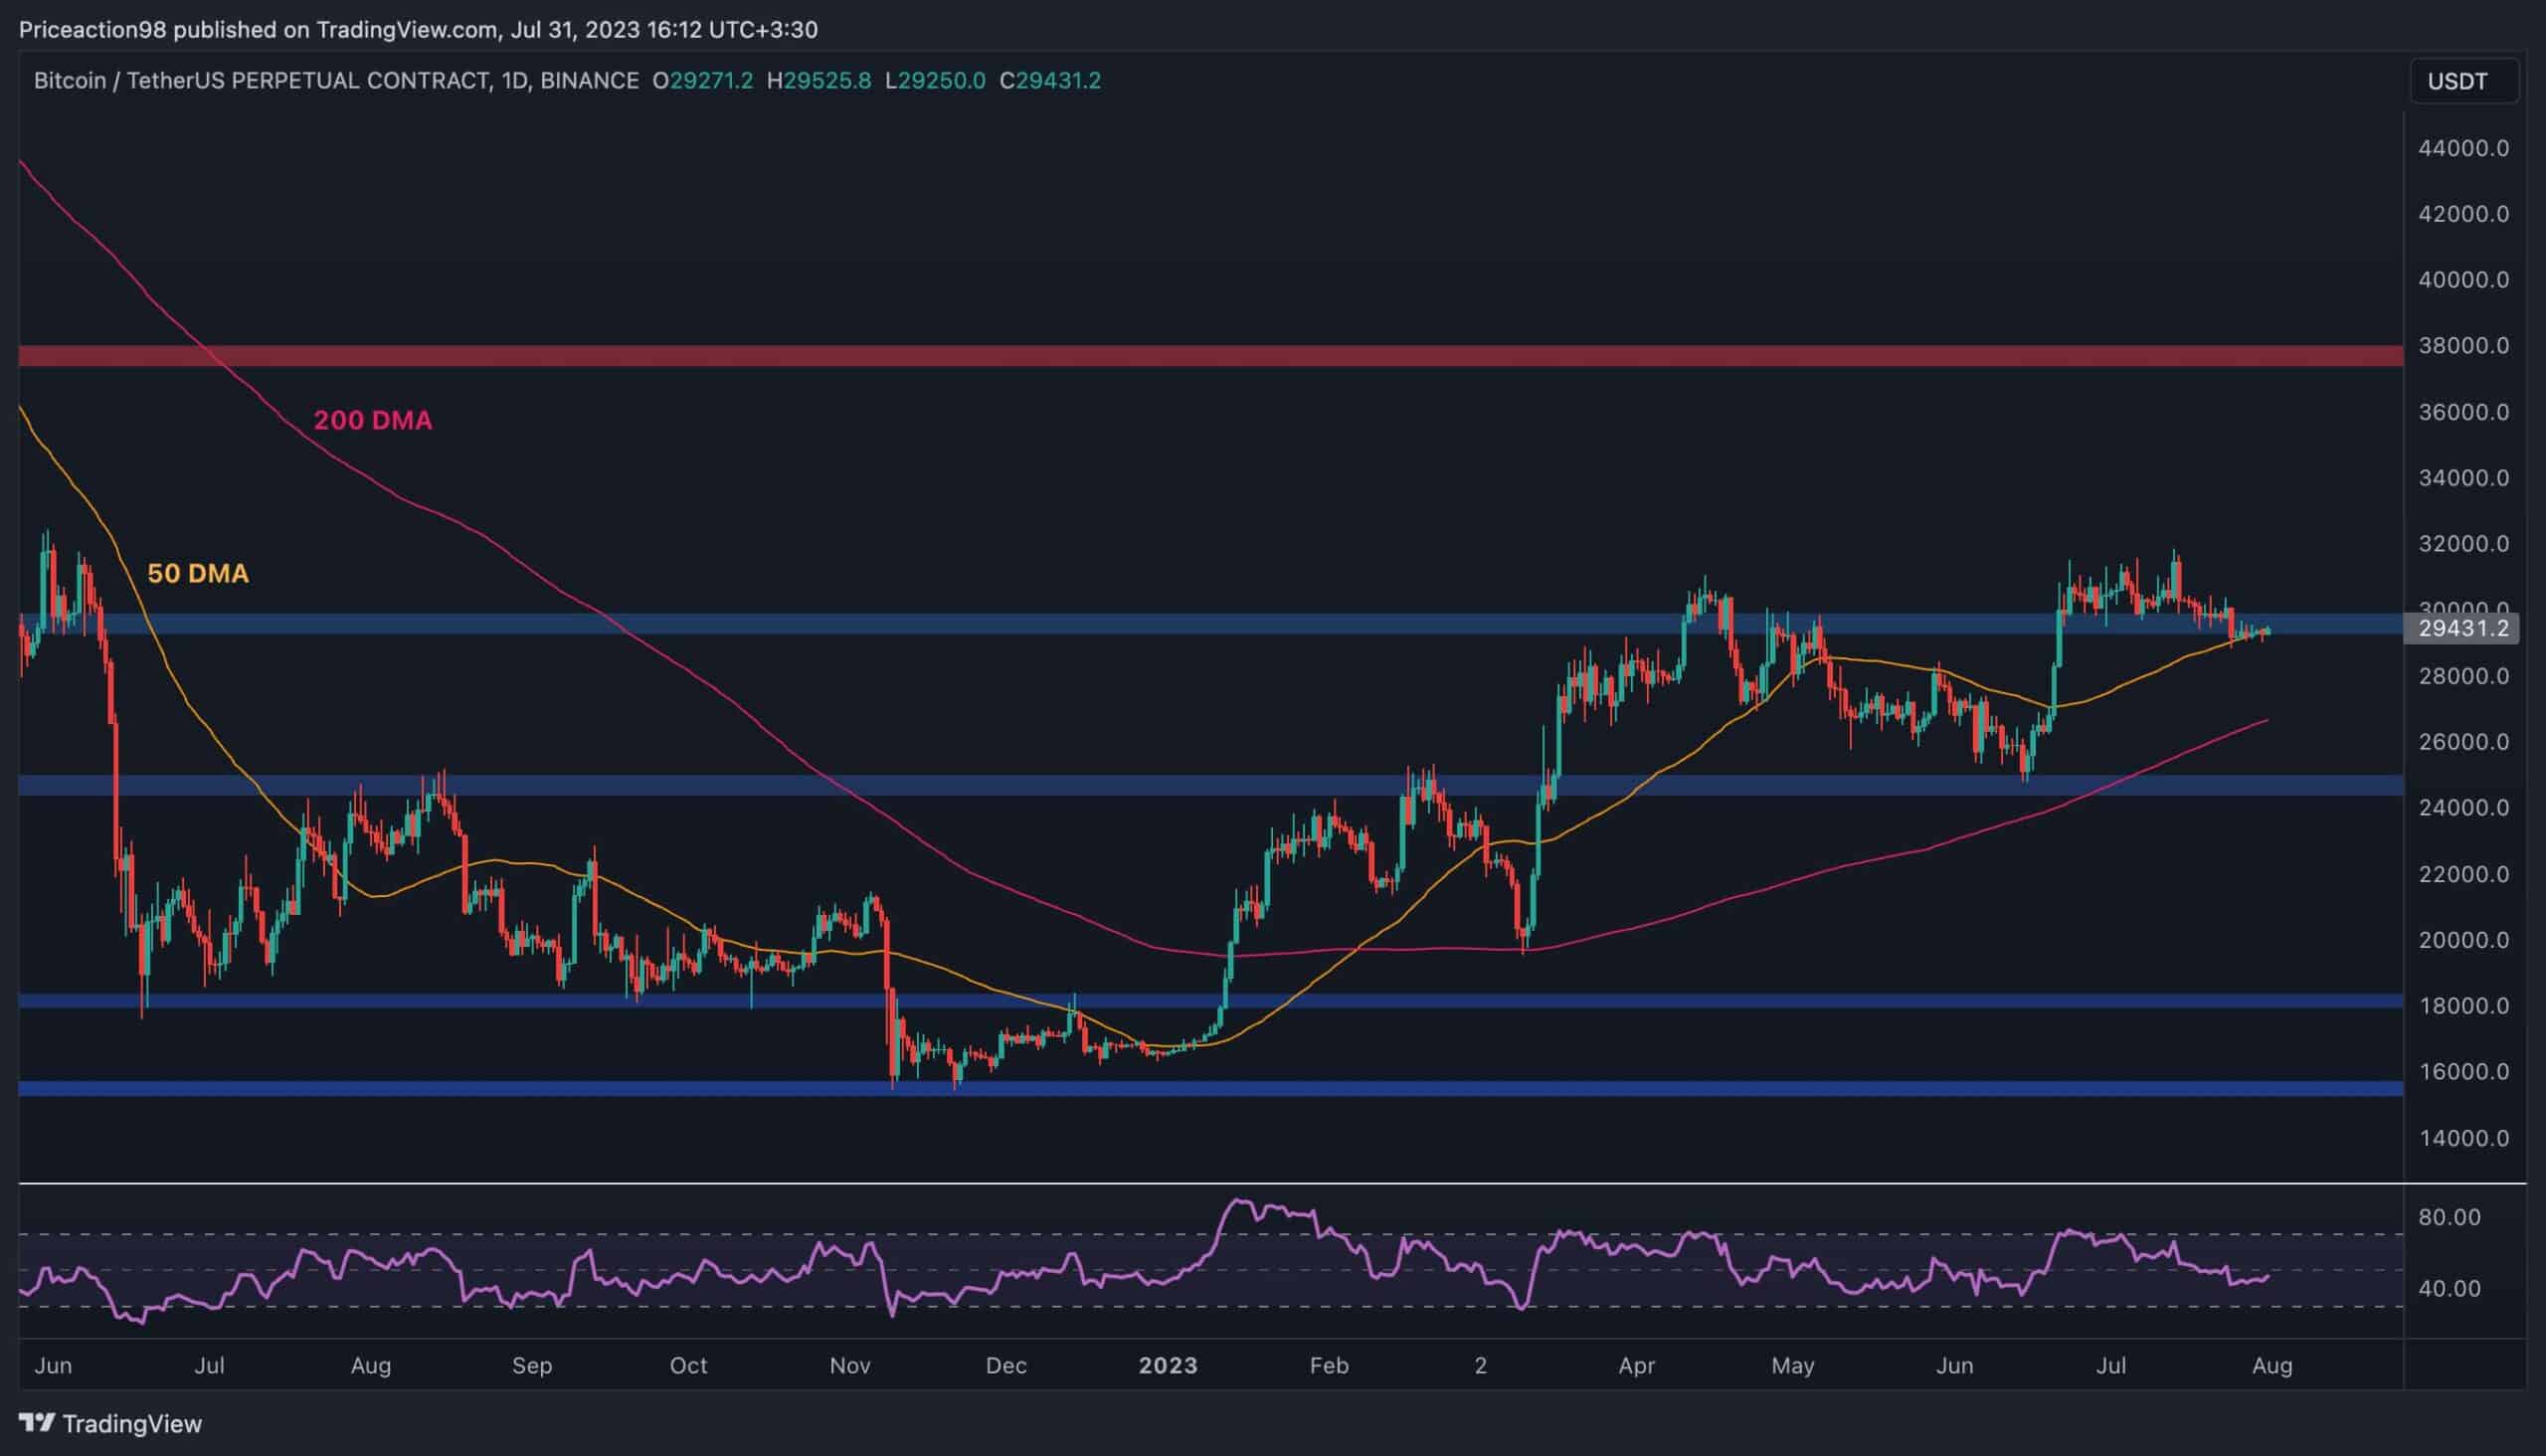 Two-possible-targets-for-btc-in-the-short-term-(bitcoin-price-analysis)